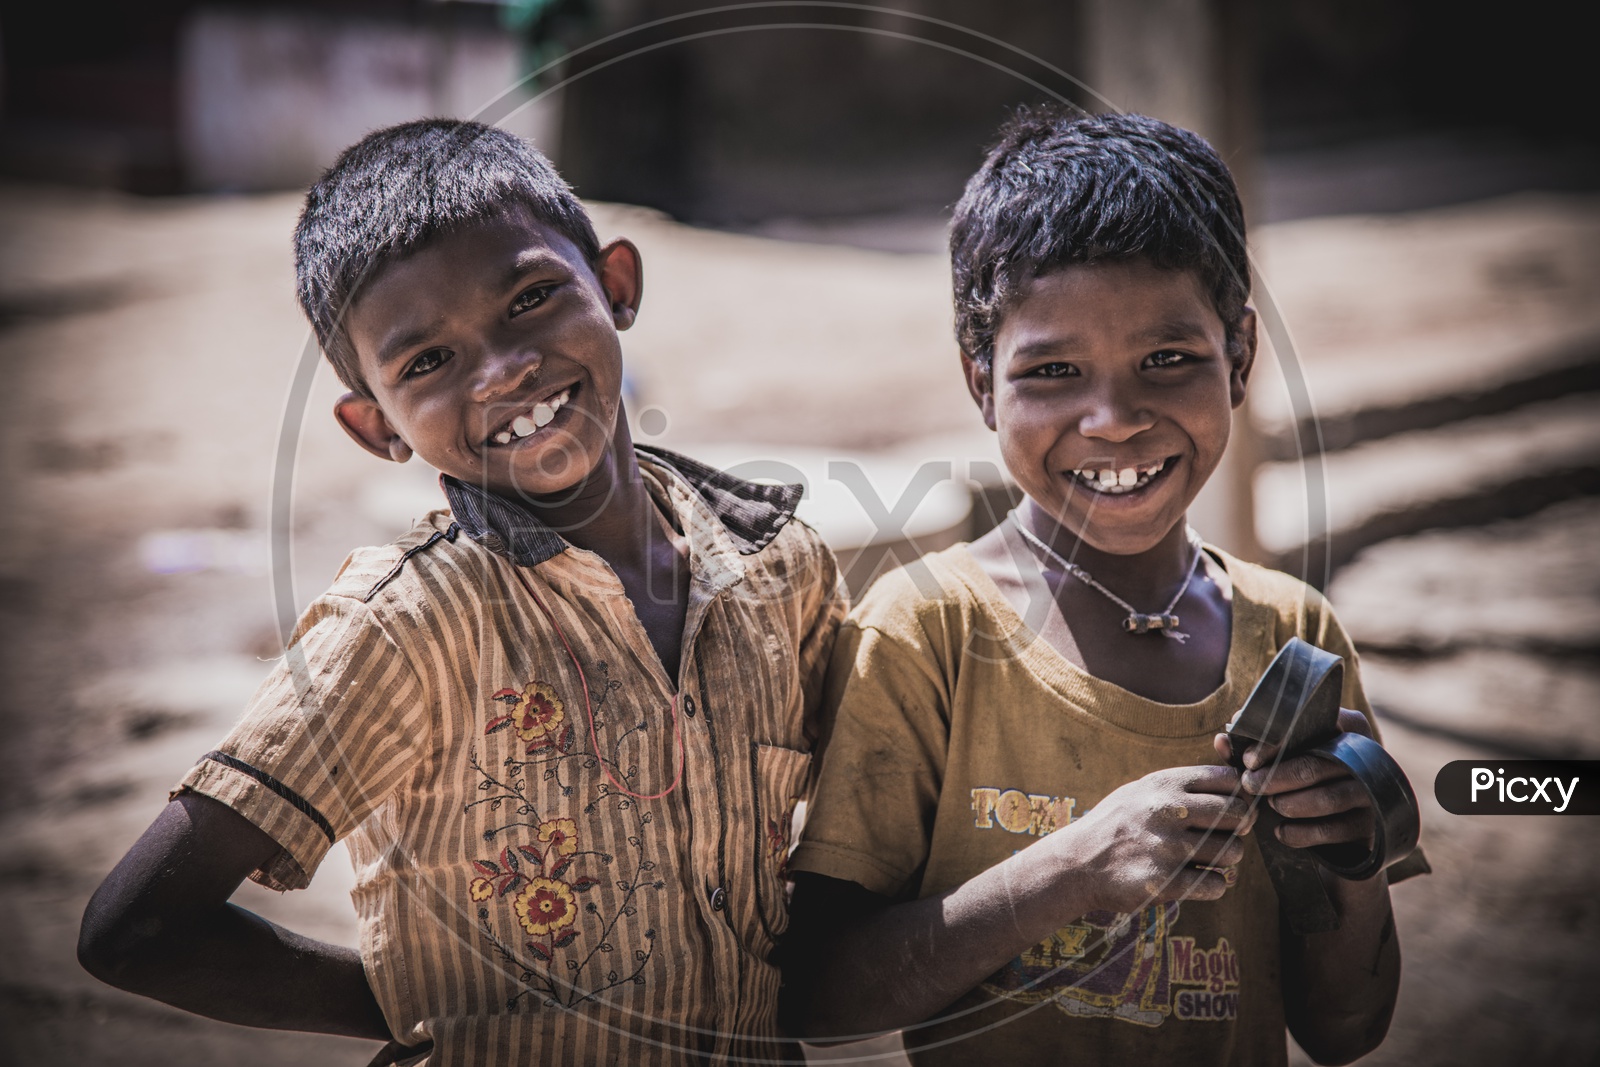 Portrait of Tribal Children With Smiling Faces